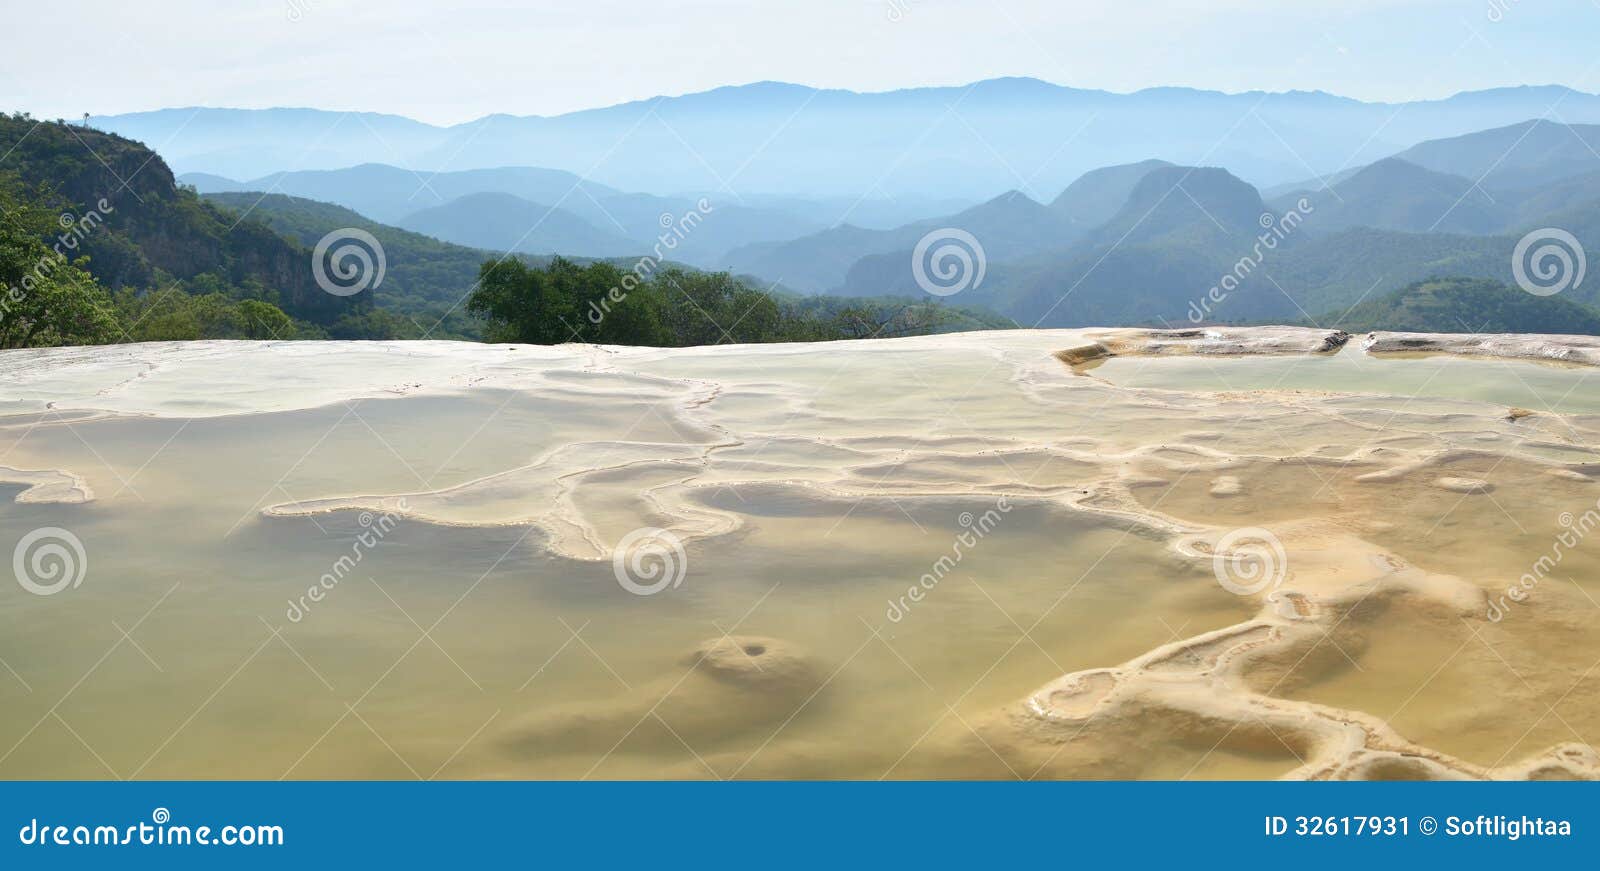 thermal springs hierve el agua in oaxaca is one of the most beau